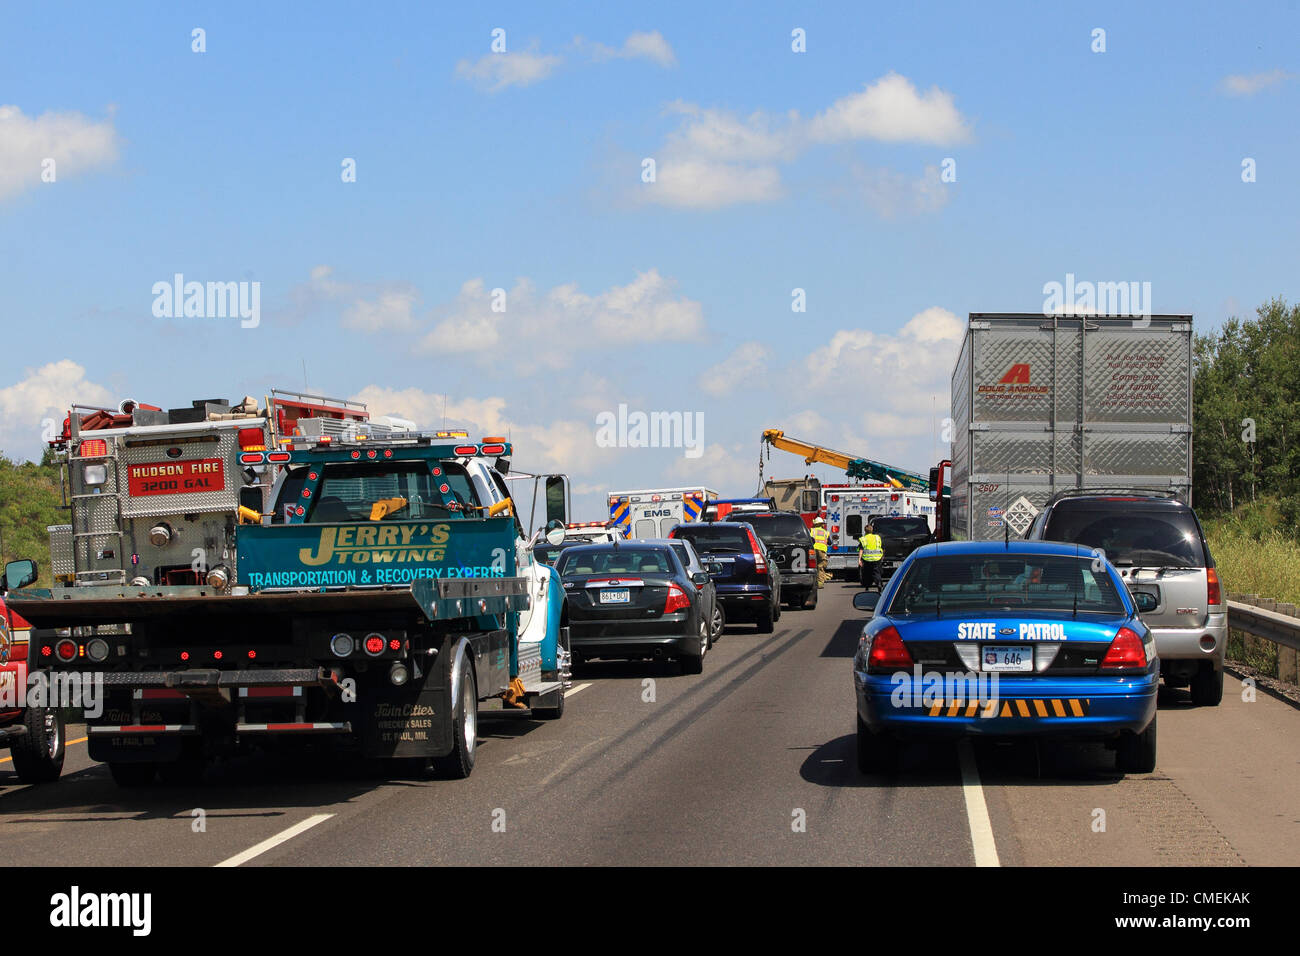 Monday, 30 July, 2012 -- Emergency workers try to free the driver of a Sport Utility Vehicle which crashed into the rear of a flatbed semi-trailer on I-94 near mile marker 6 in Hudson, Wisconsin, USA. At least one person died in the accident. Stock Photo